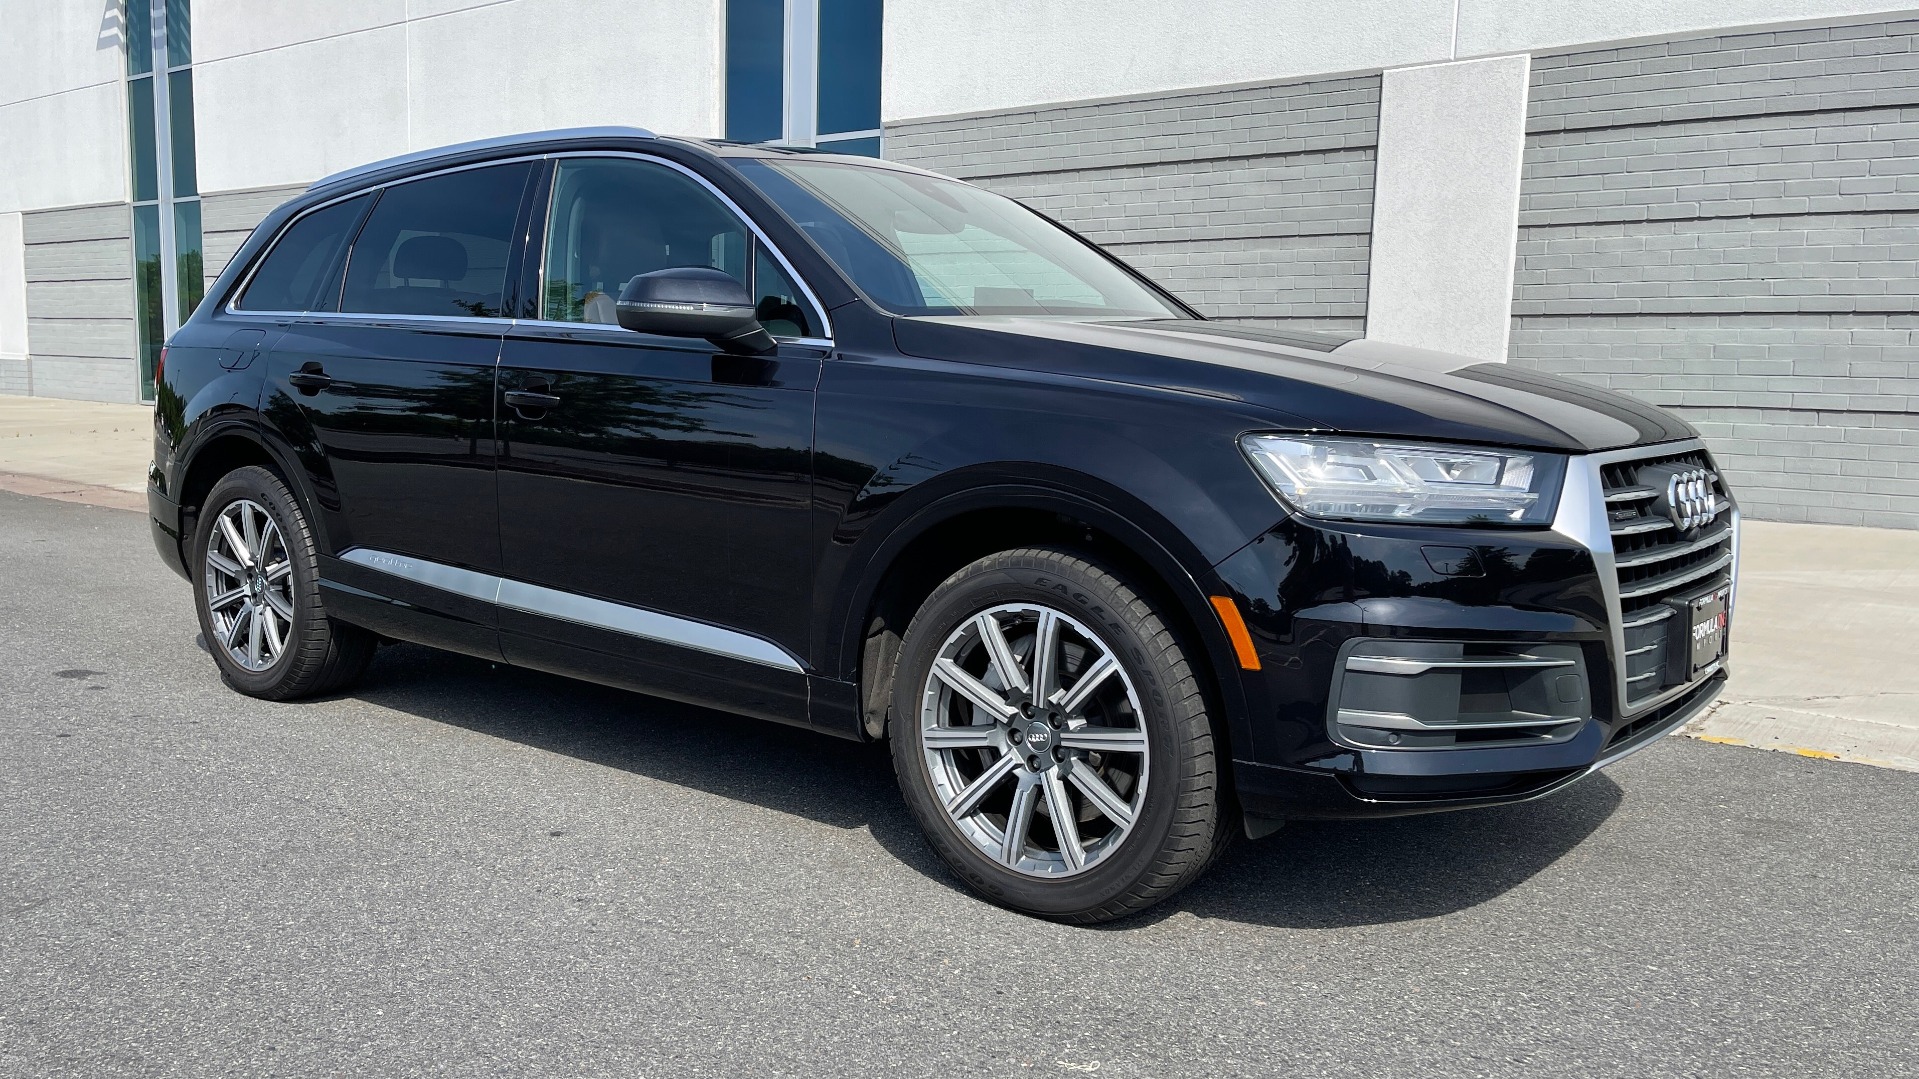 Used 2018 Audi Q7 PREMIUM PLUS / NAV / PANO-ROOF / BOSE / 3-ROW / REARVIEW for sale Sold at Formula Imports in Charlotte NC 28227 4